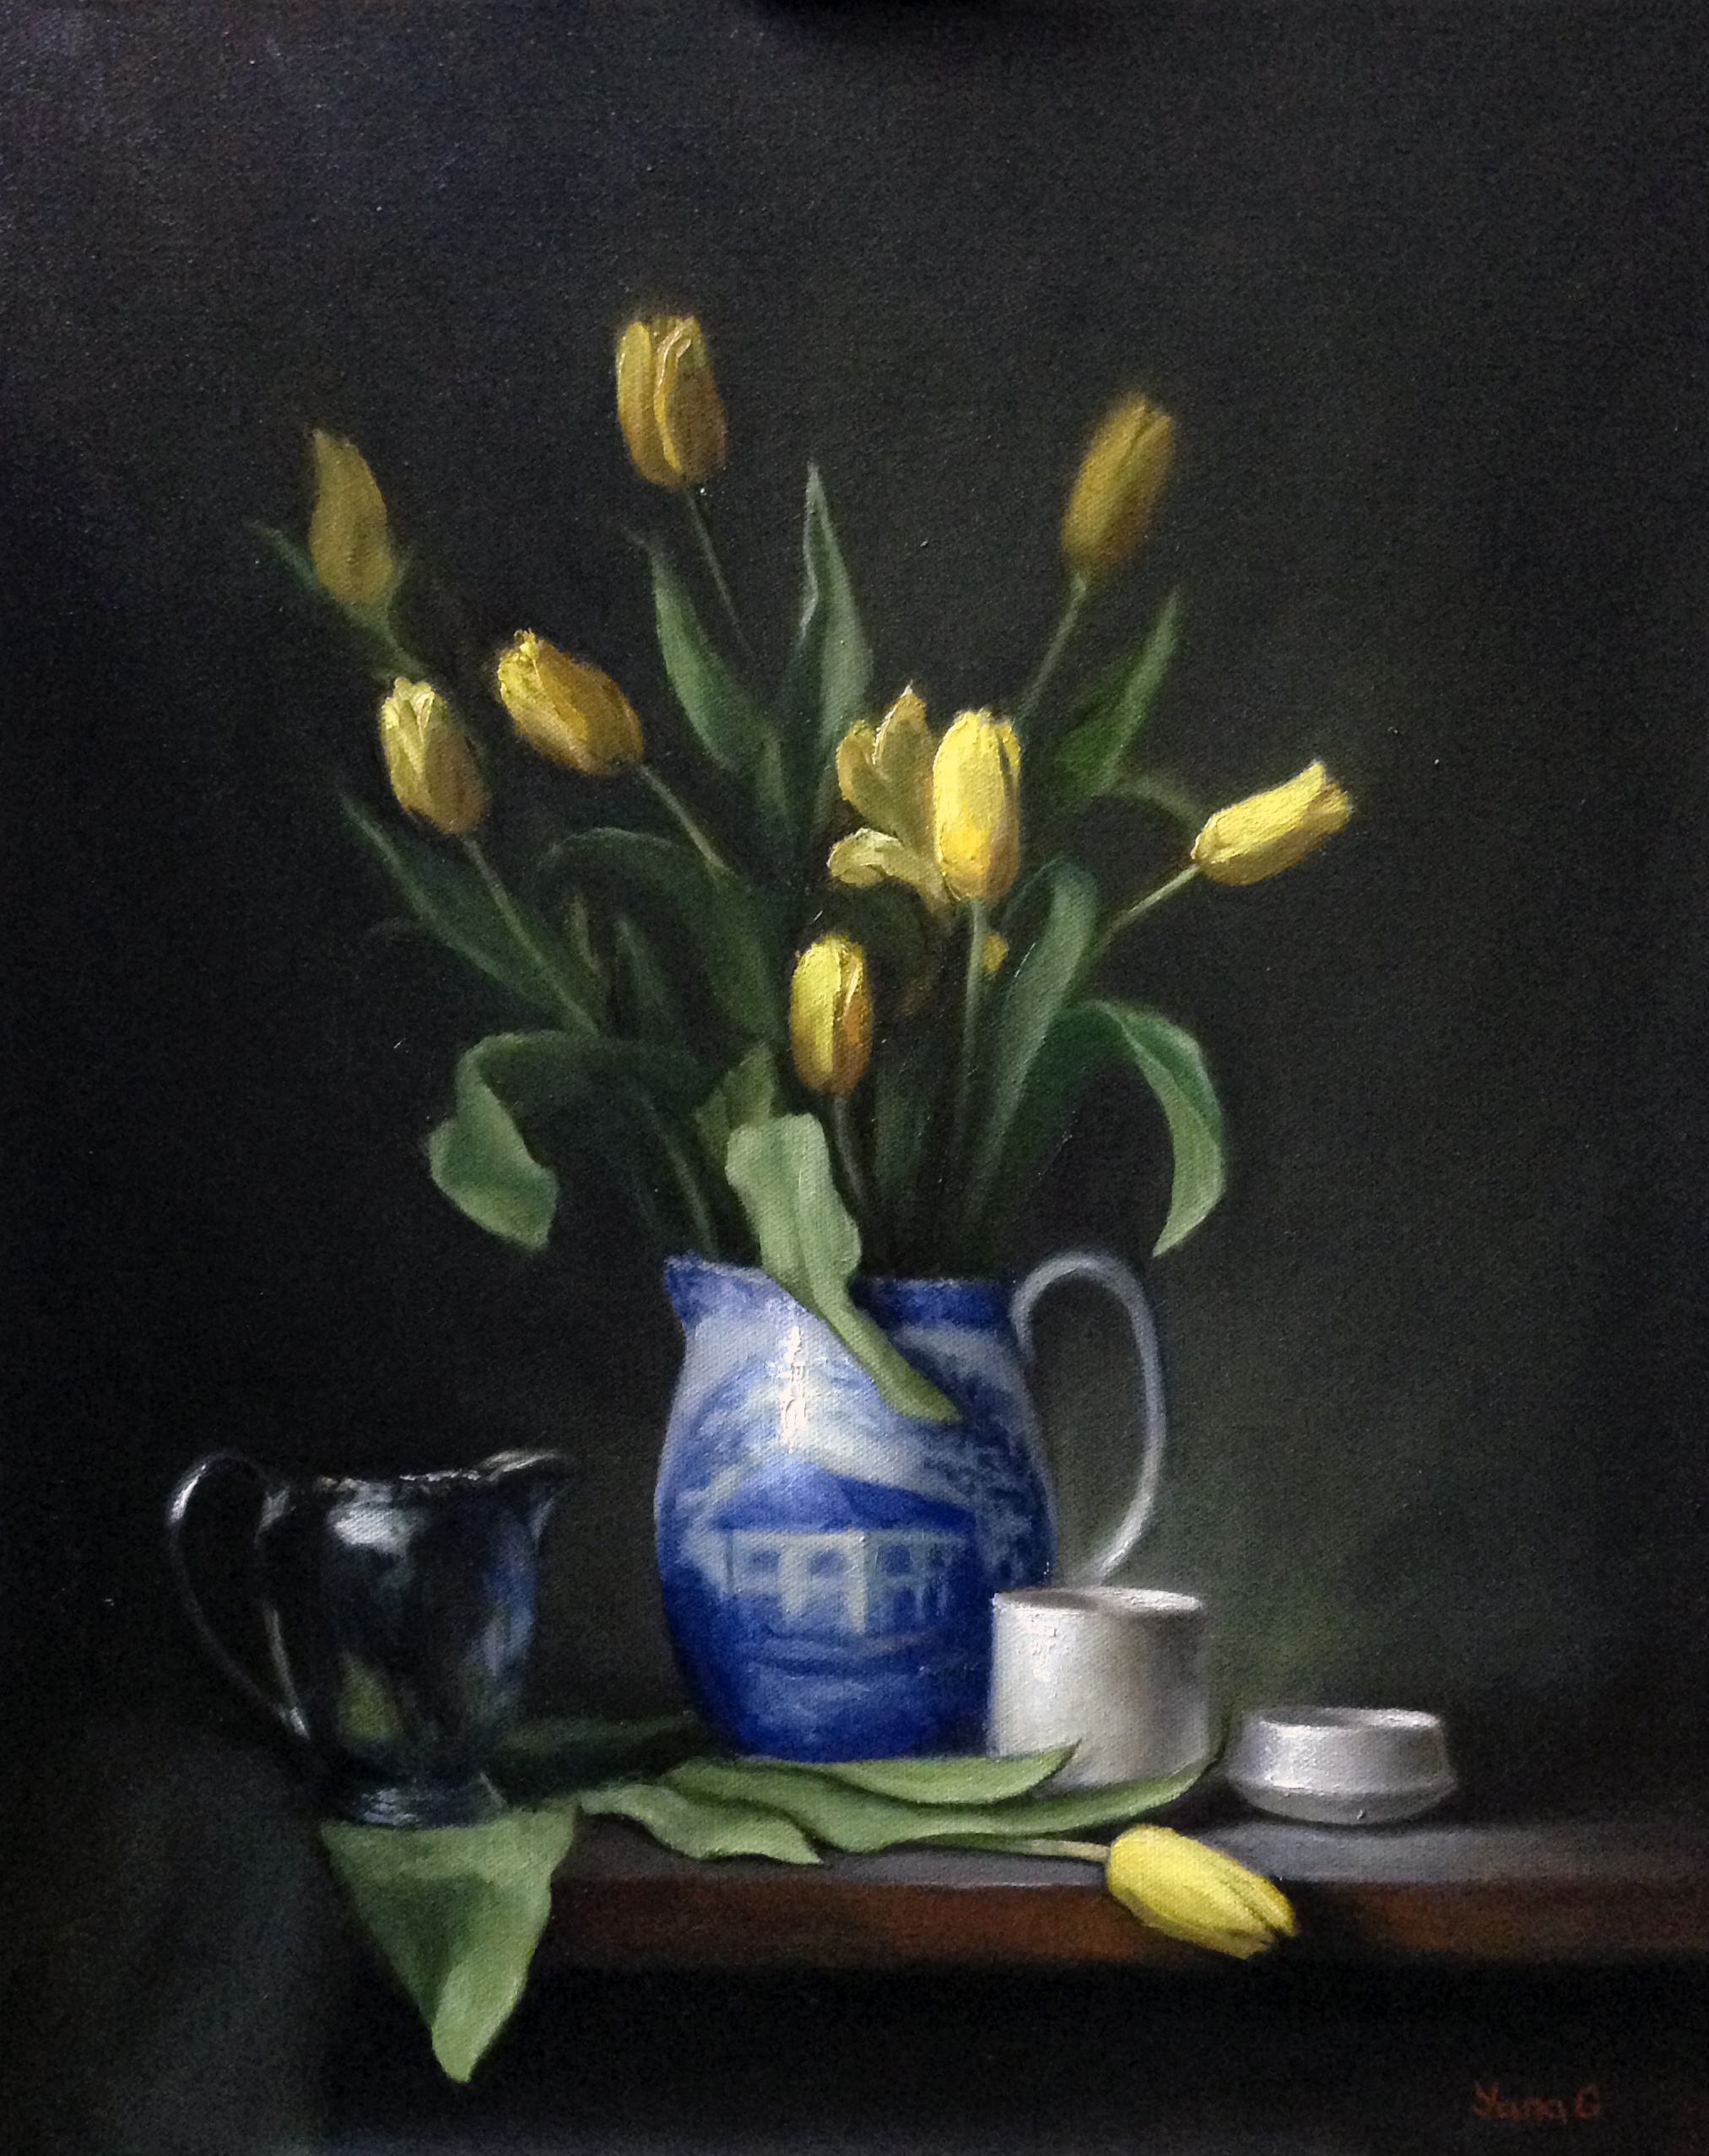 Yellow Tulips 16x20 Oil on canvas 